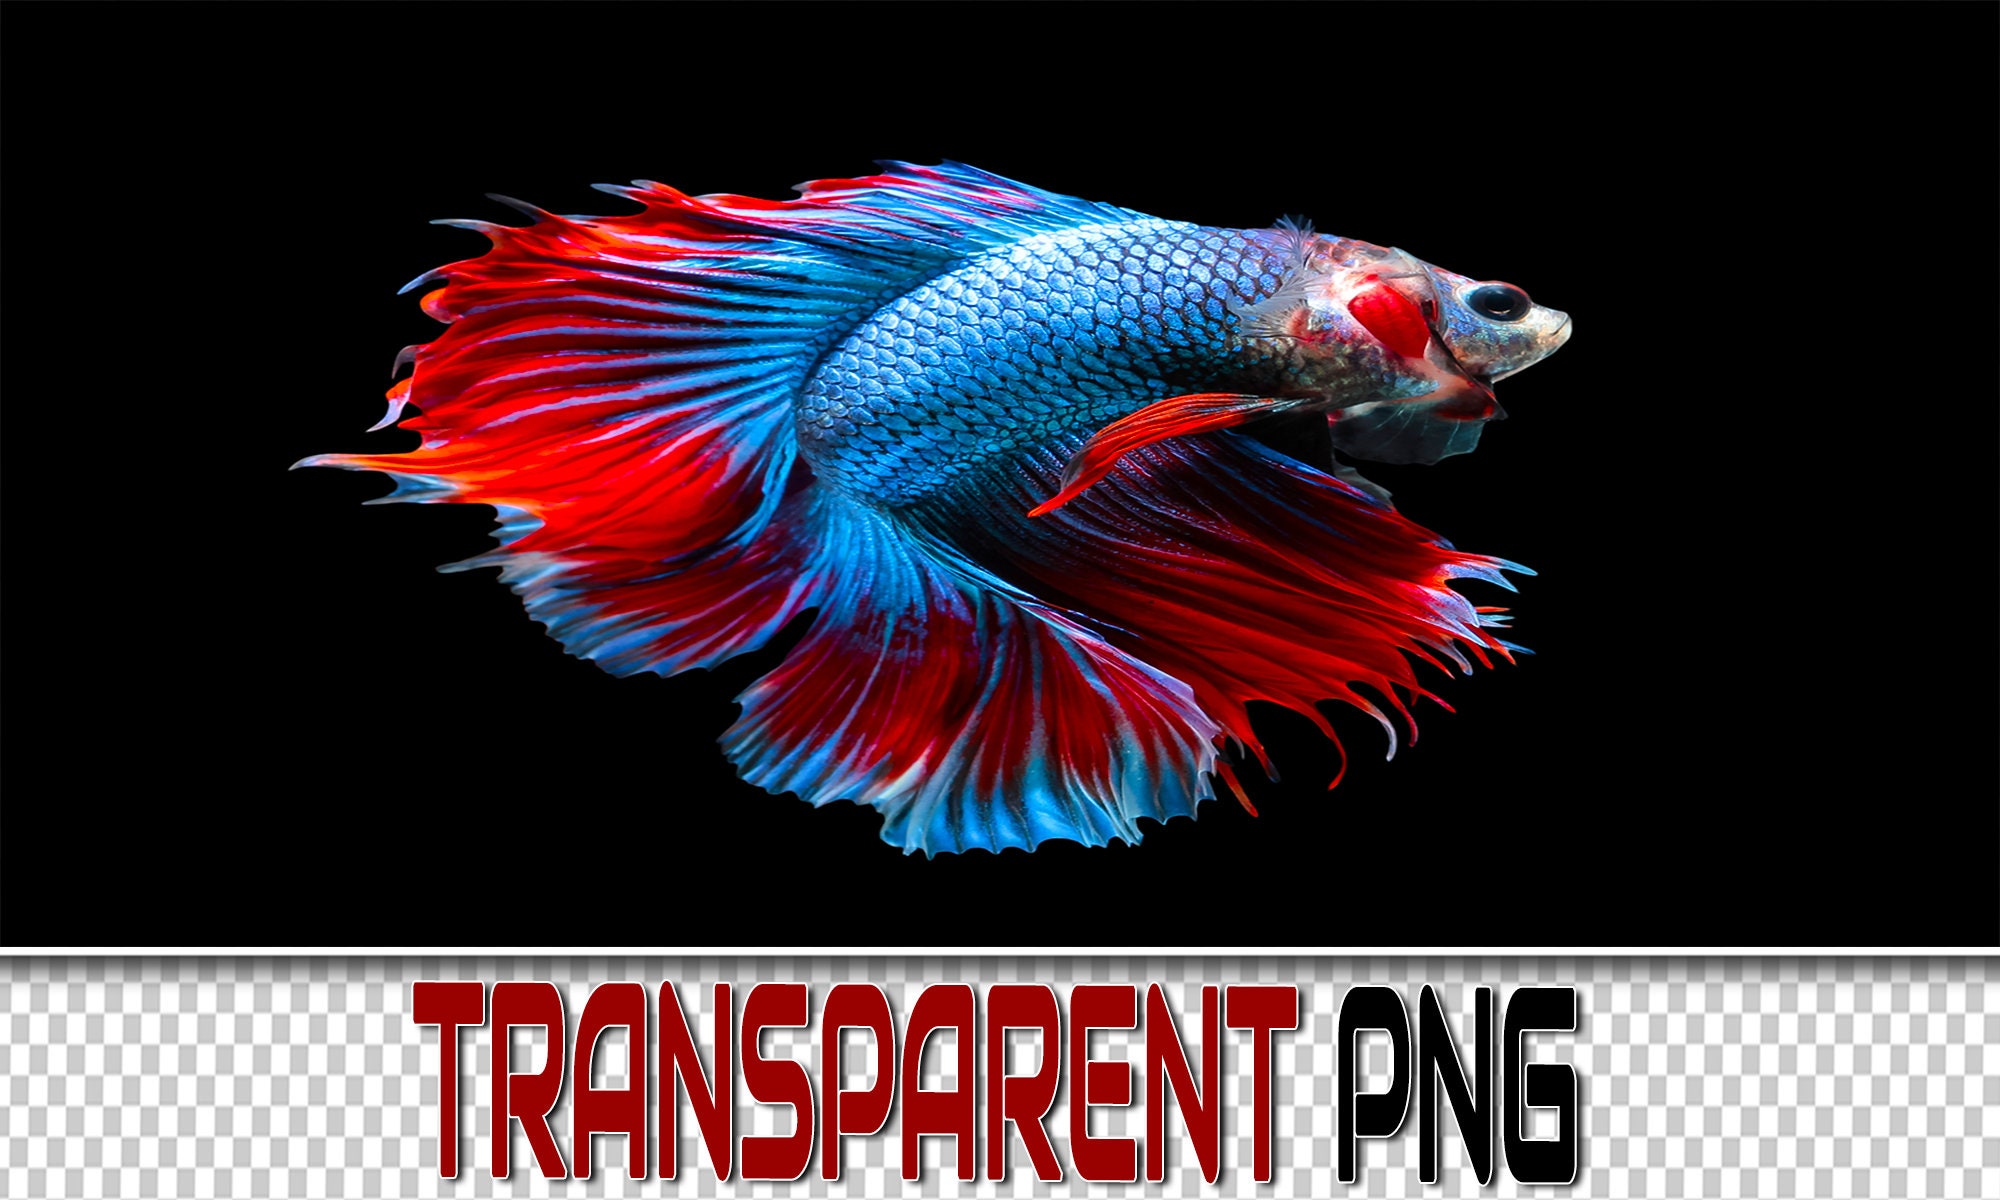 300 FISHES TRANSPARENT PNG, Png Animals, Png Wildlife, Png Files, Photoshop  Png, Png Clipart, Png Art Graphic, Png Fish, Png Sea Life, Png -  Canada